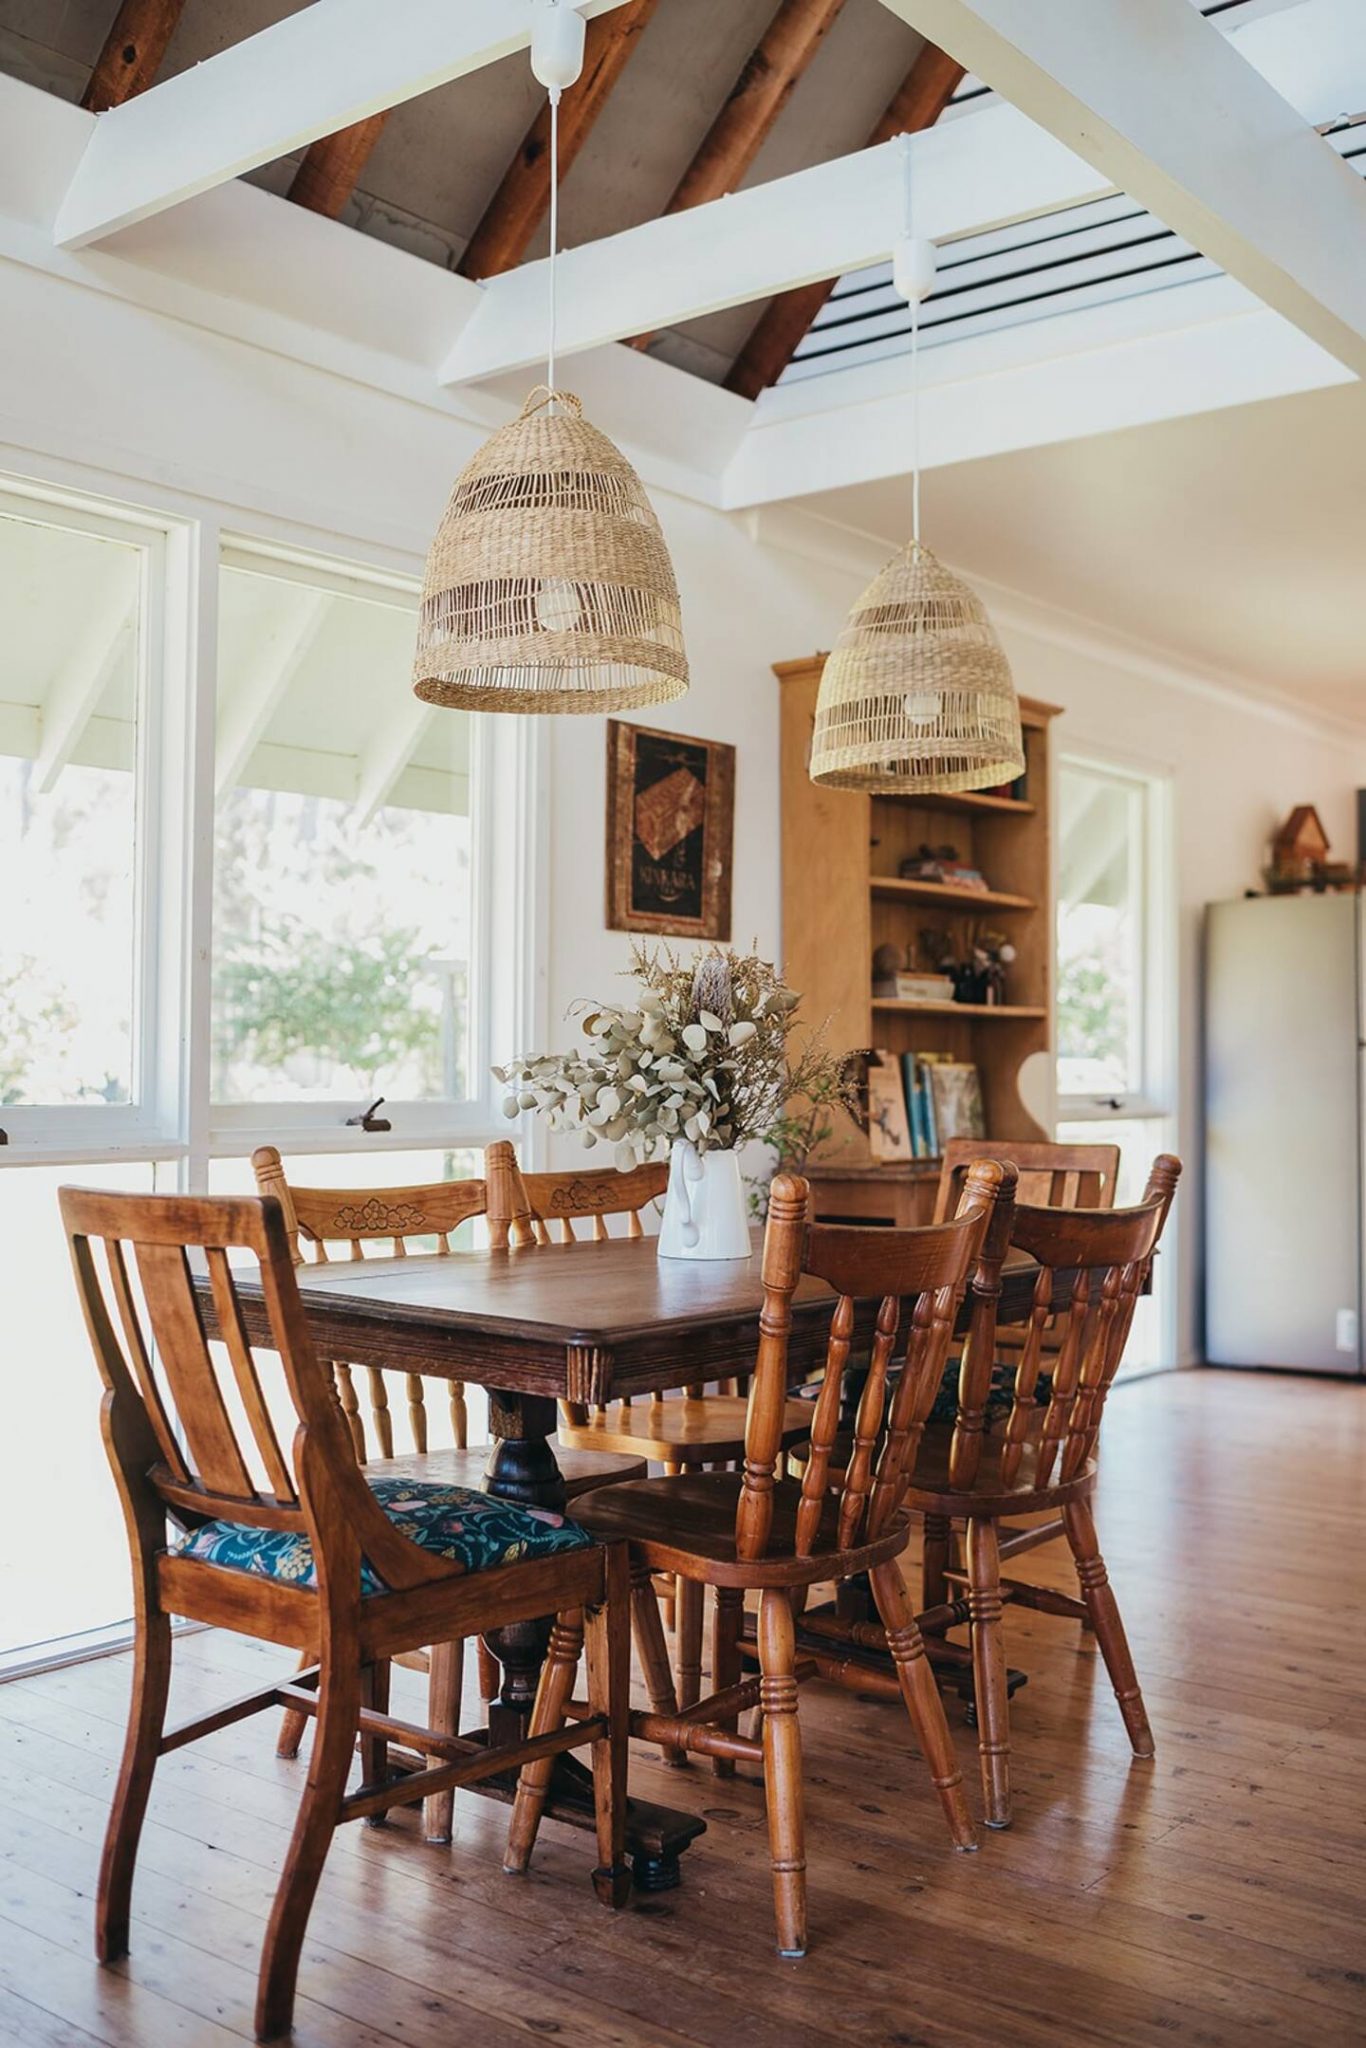 The dining room is a wooden house of white beams